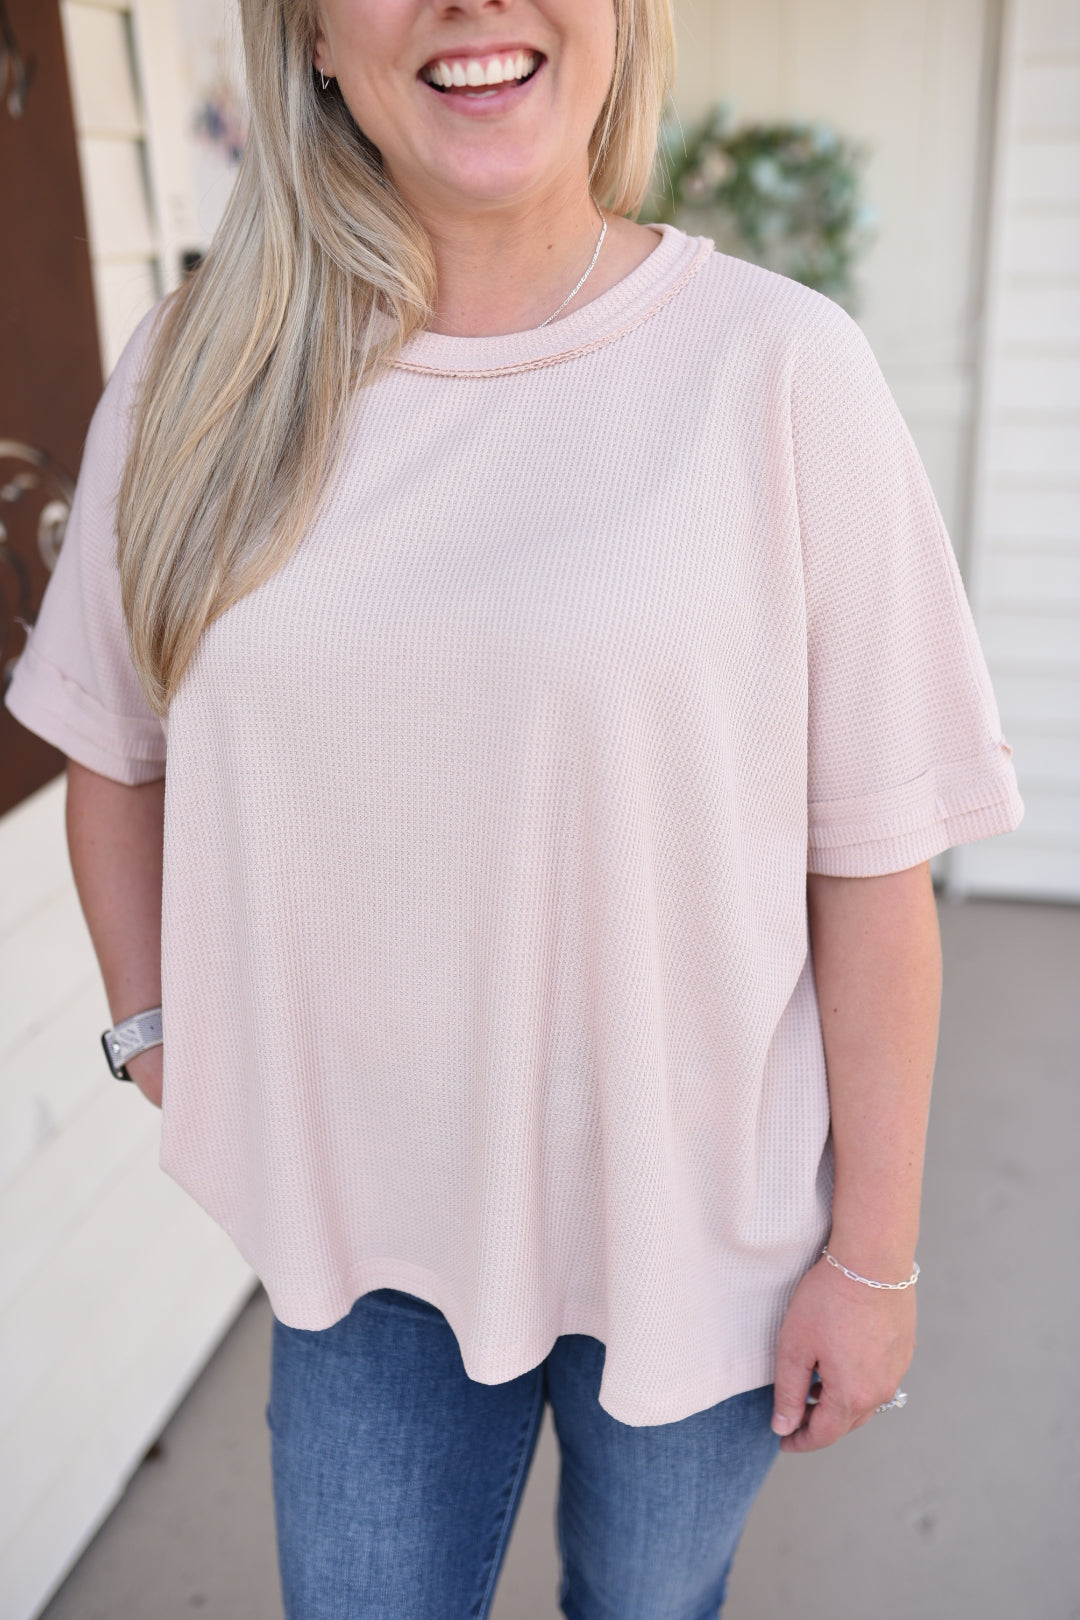 Carefree Vibes Waffle Knit Top in Natural